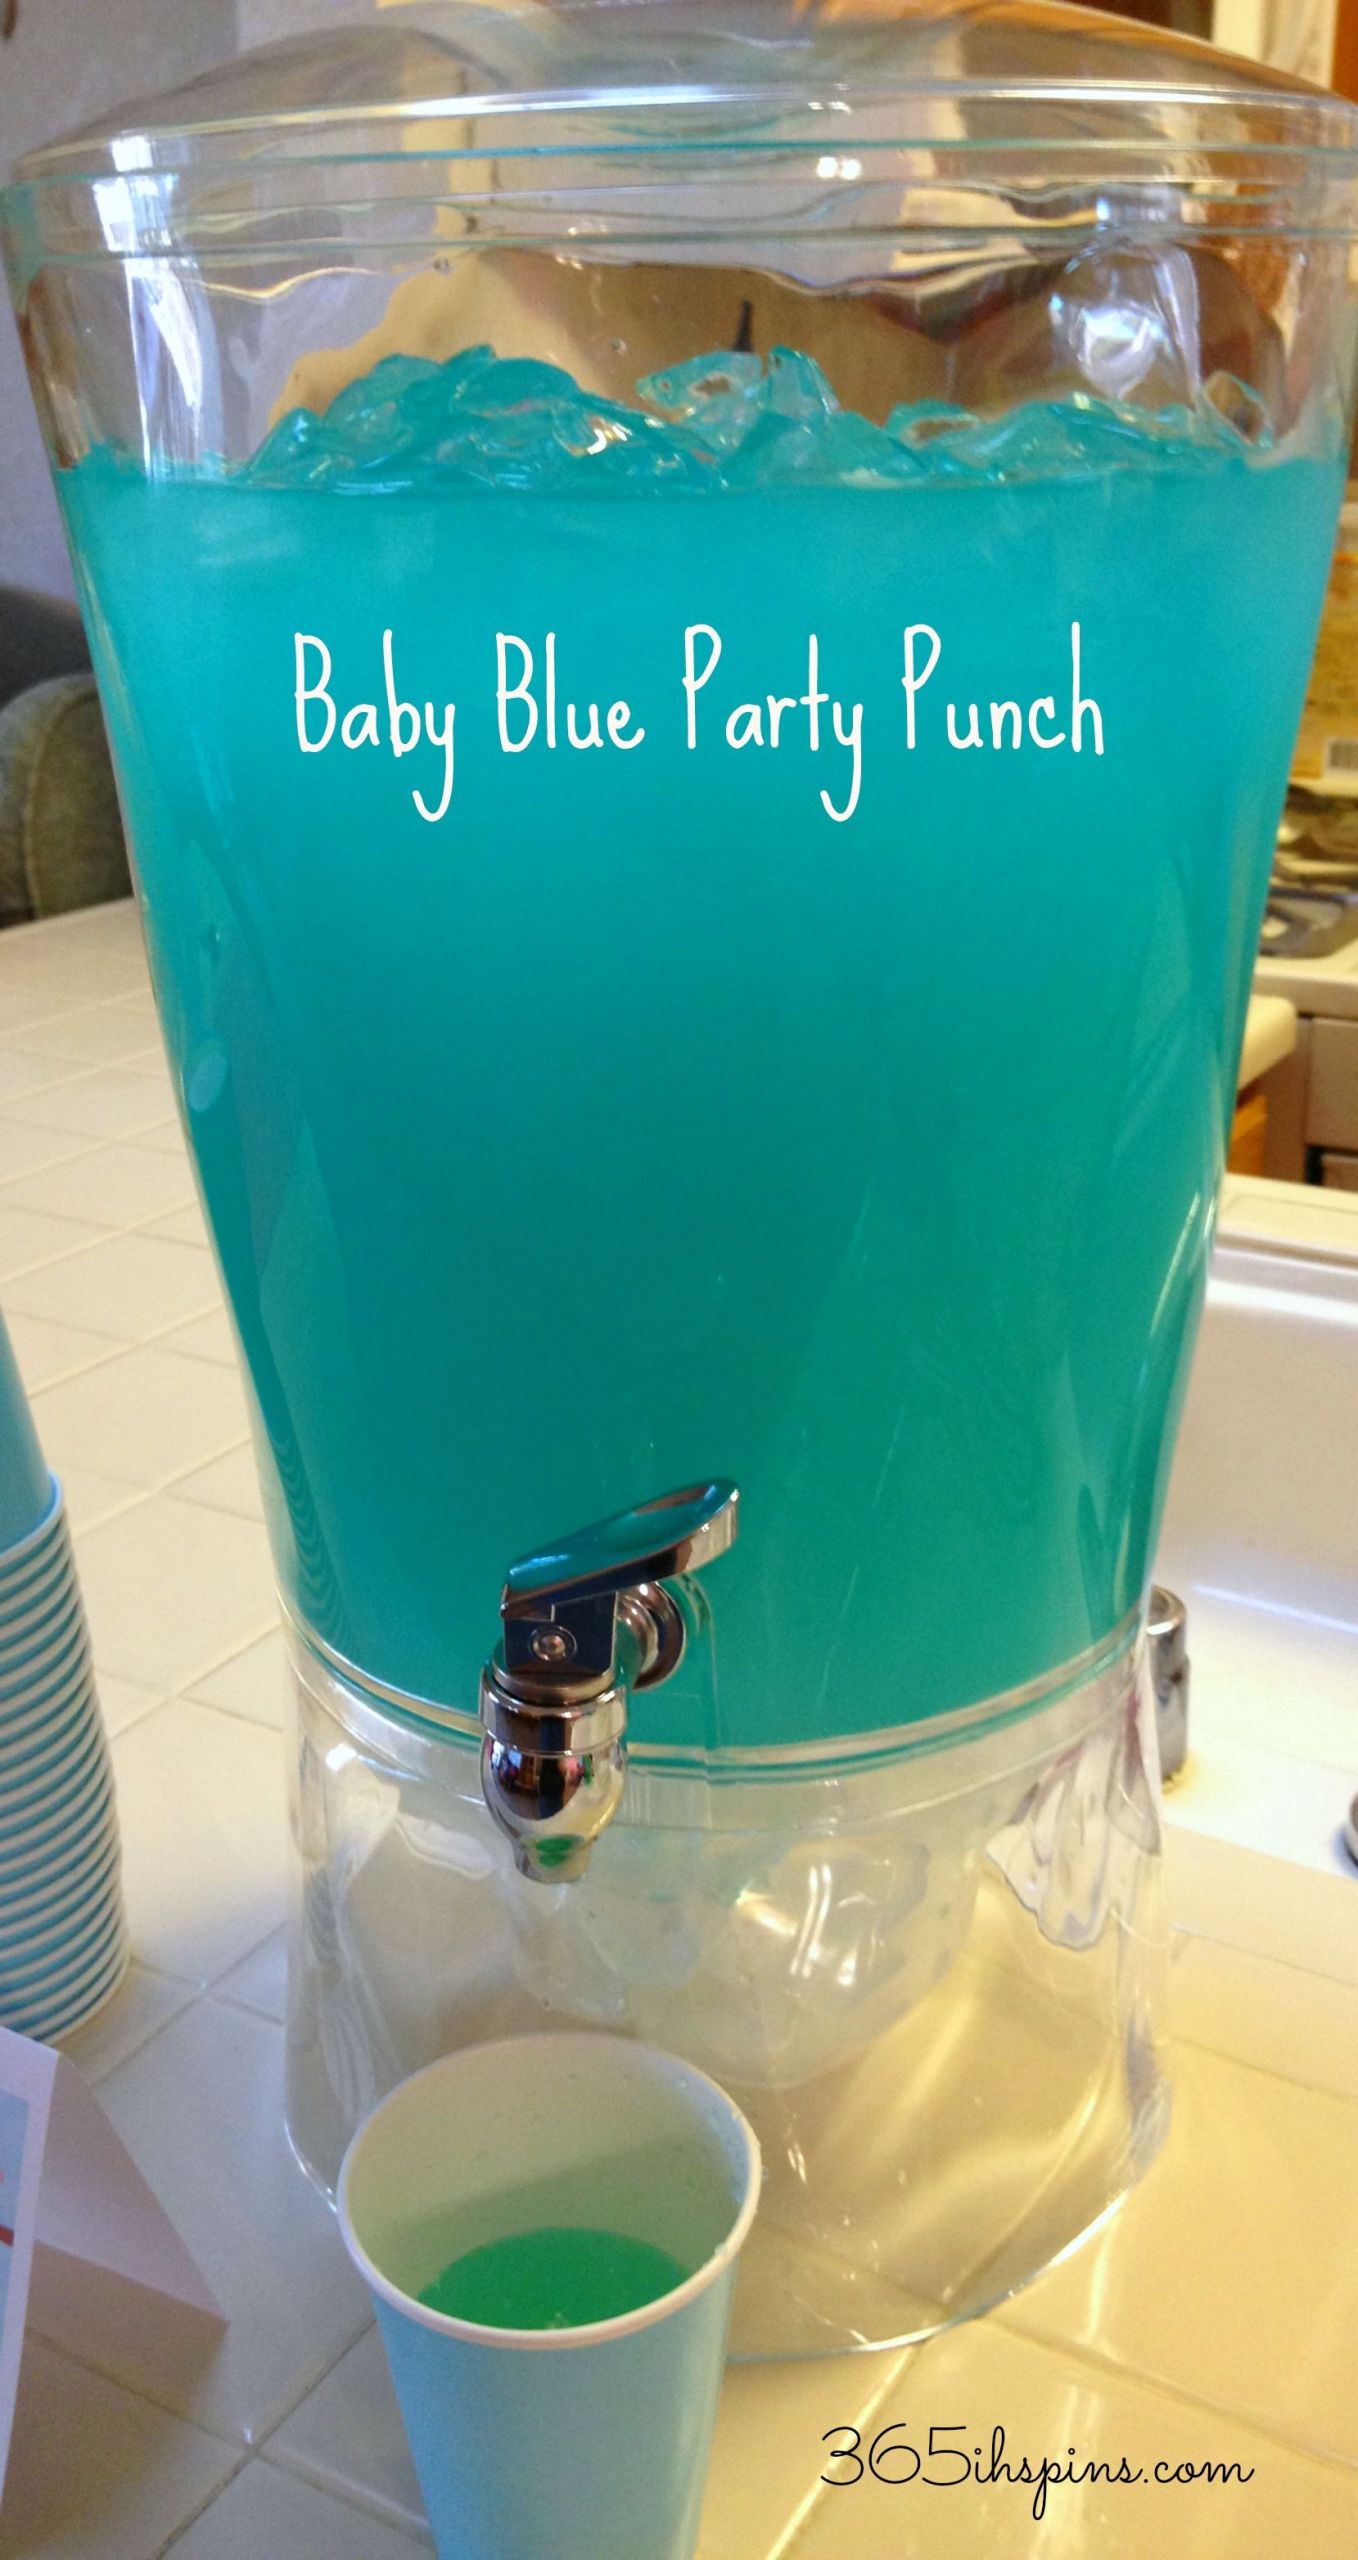 Simple Punch Recipes For Baby Showers
 Blue Punch For Baby Shower